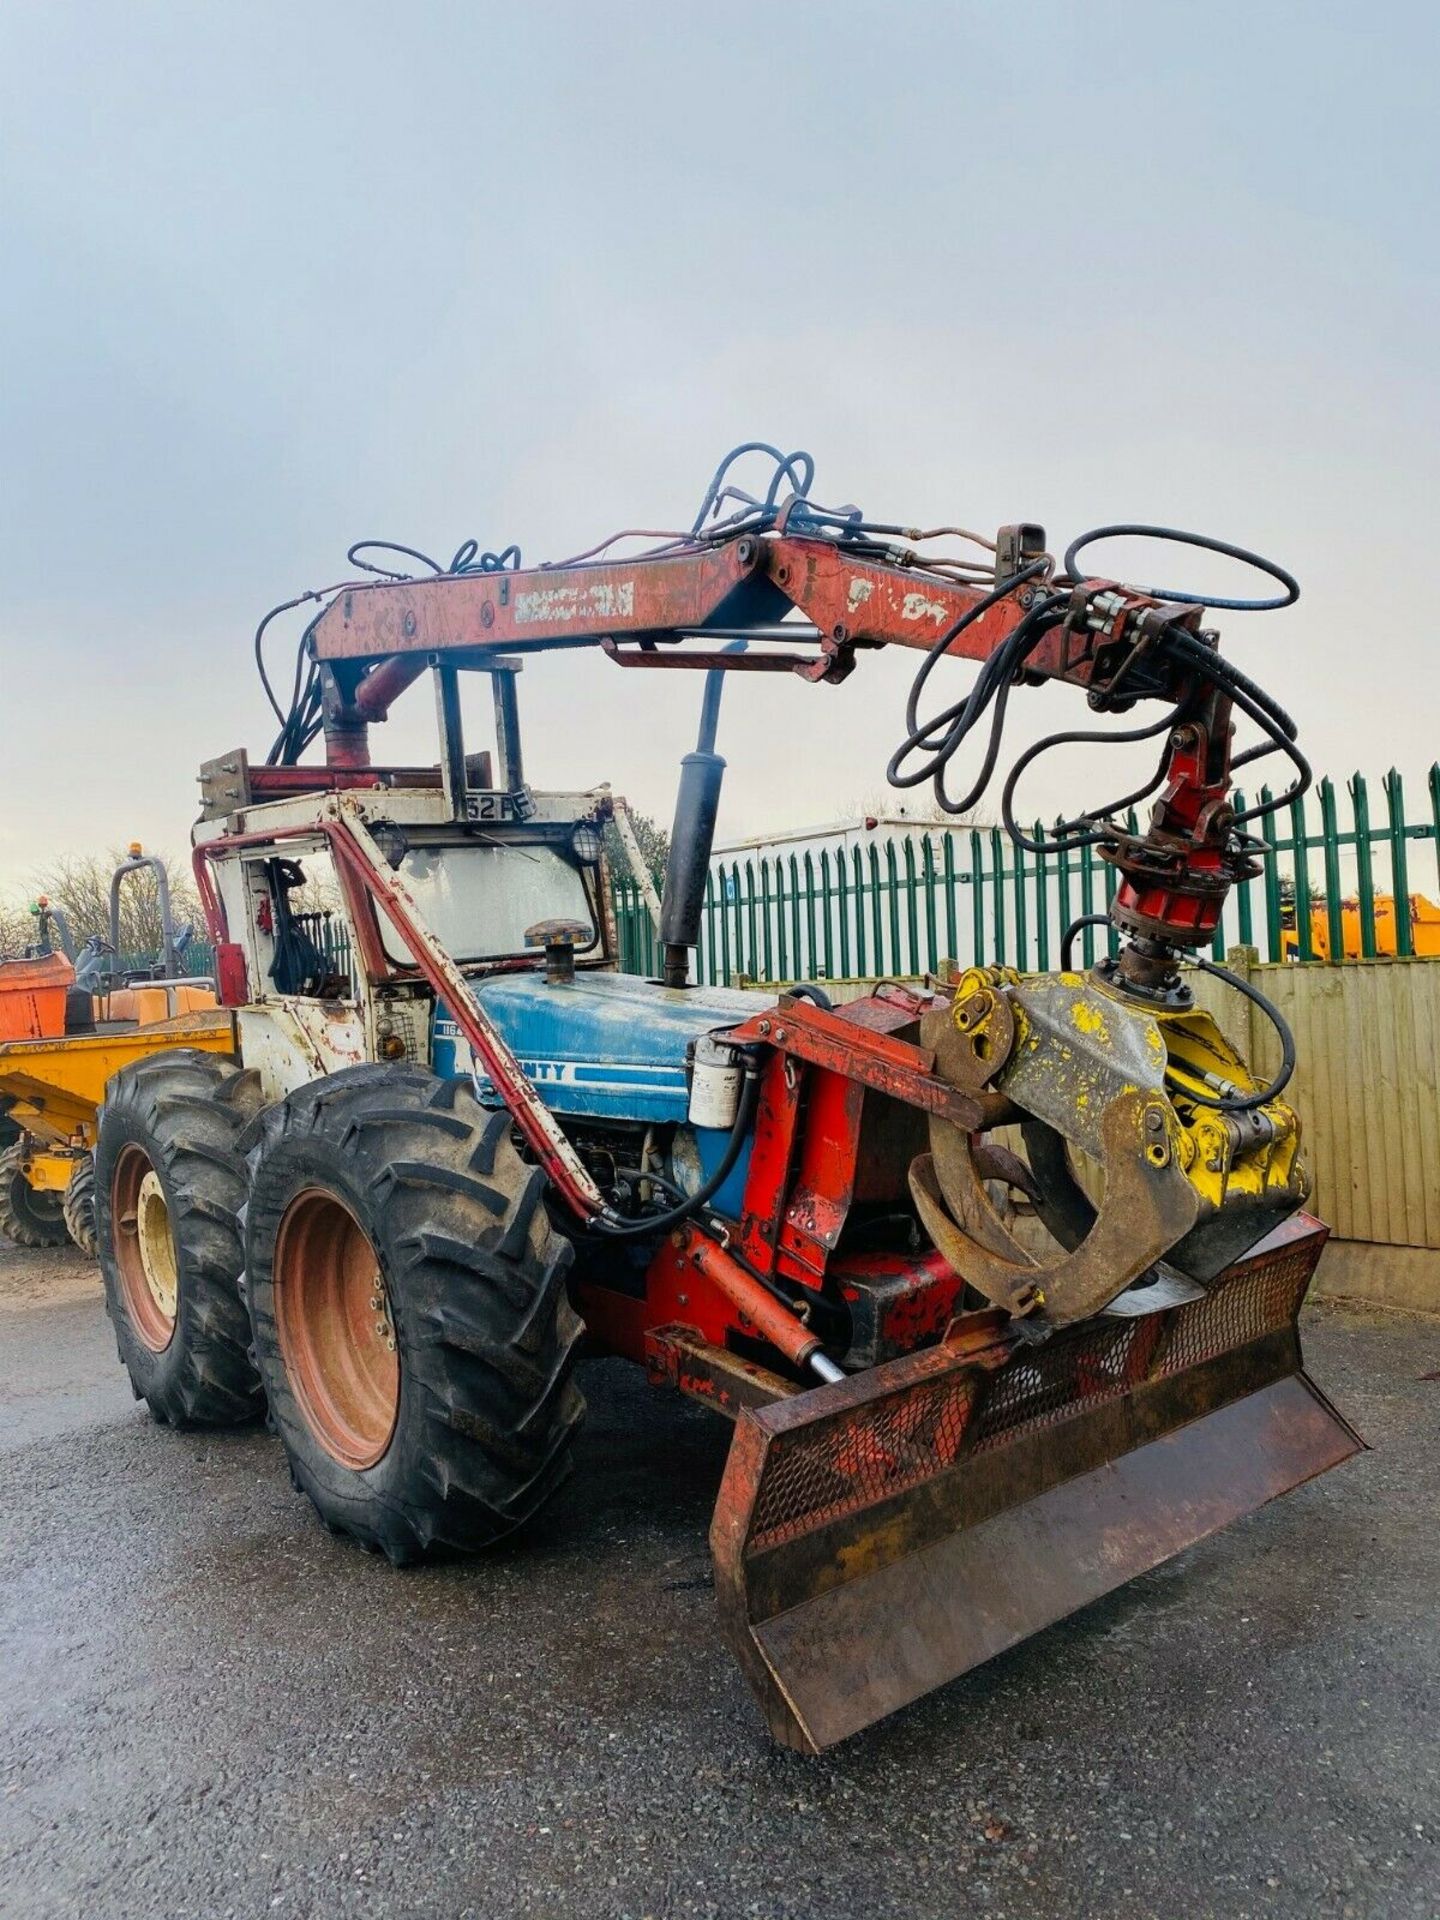 Ford County 1164 Forestry Tractor Crane Fitted - Image 2 of 12